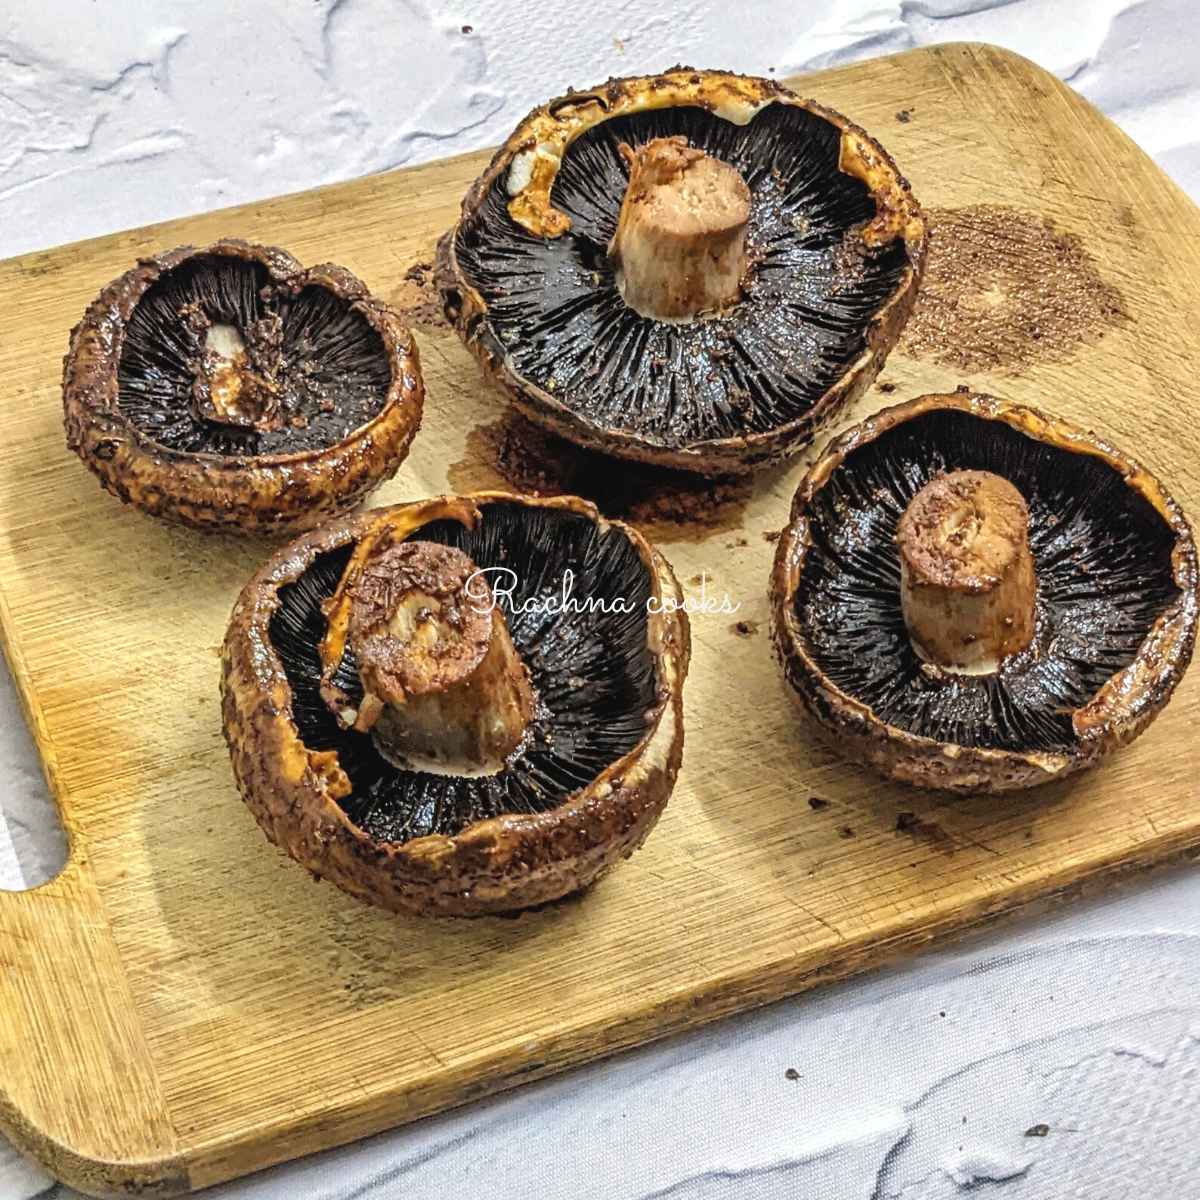 Marinade applied on both sides of portobello mushrooms and kept stalk side up on a chopping board.